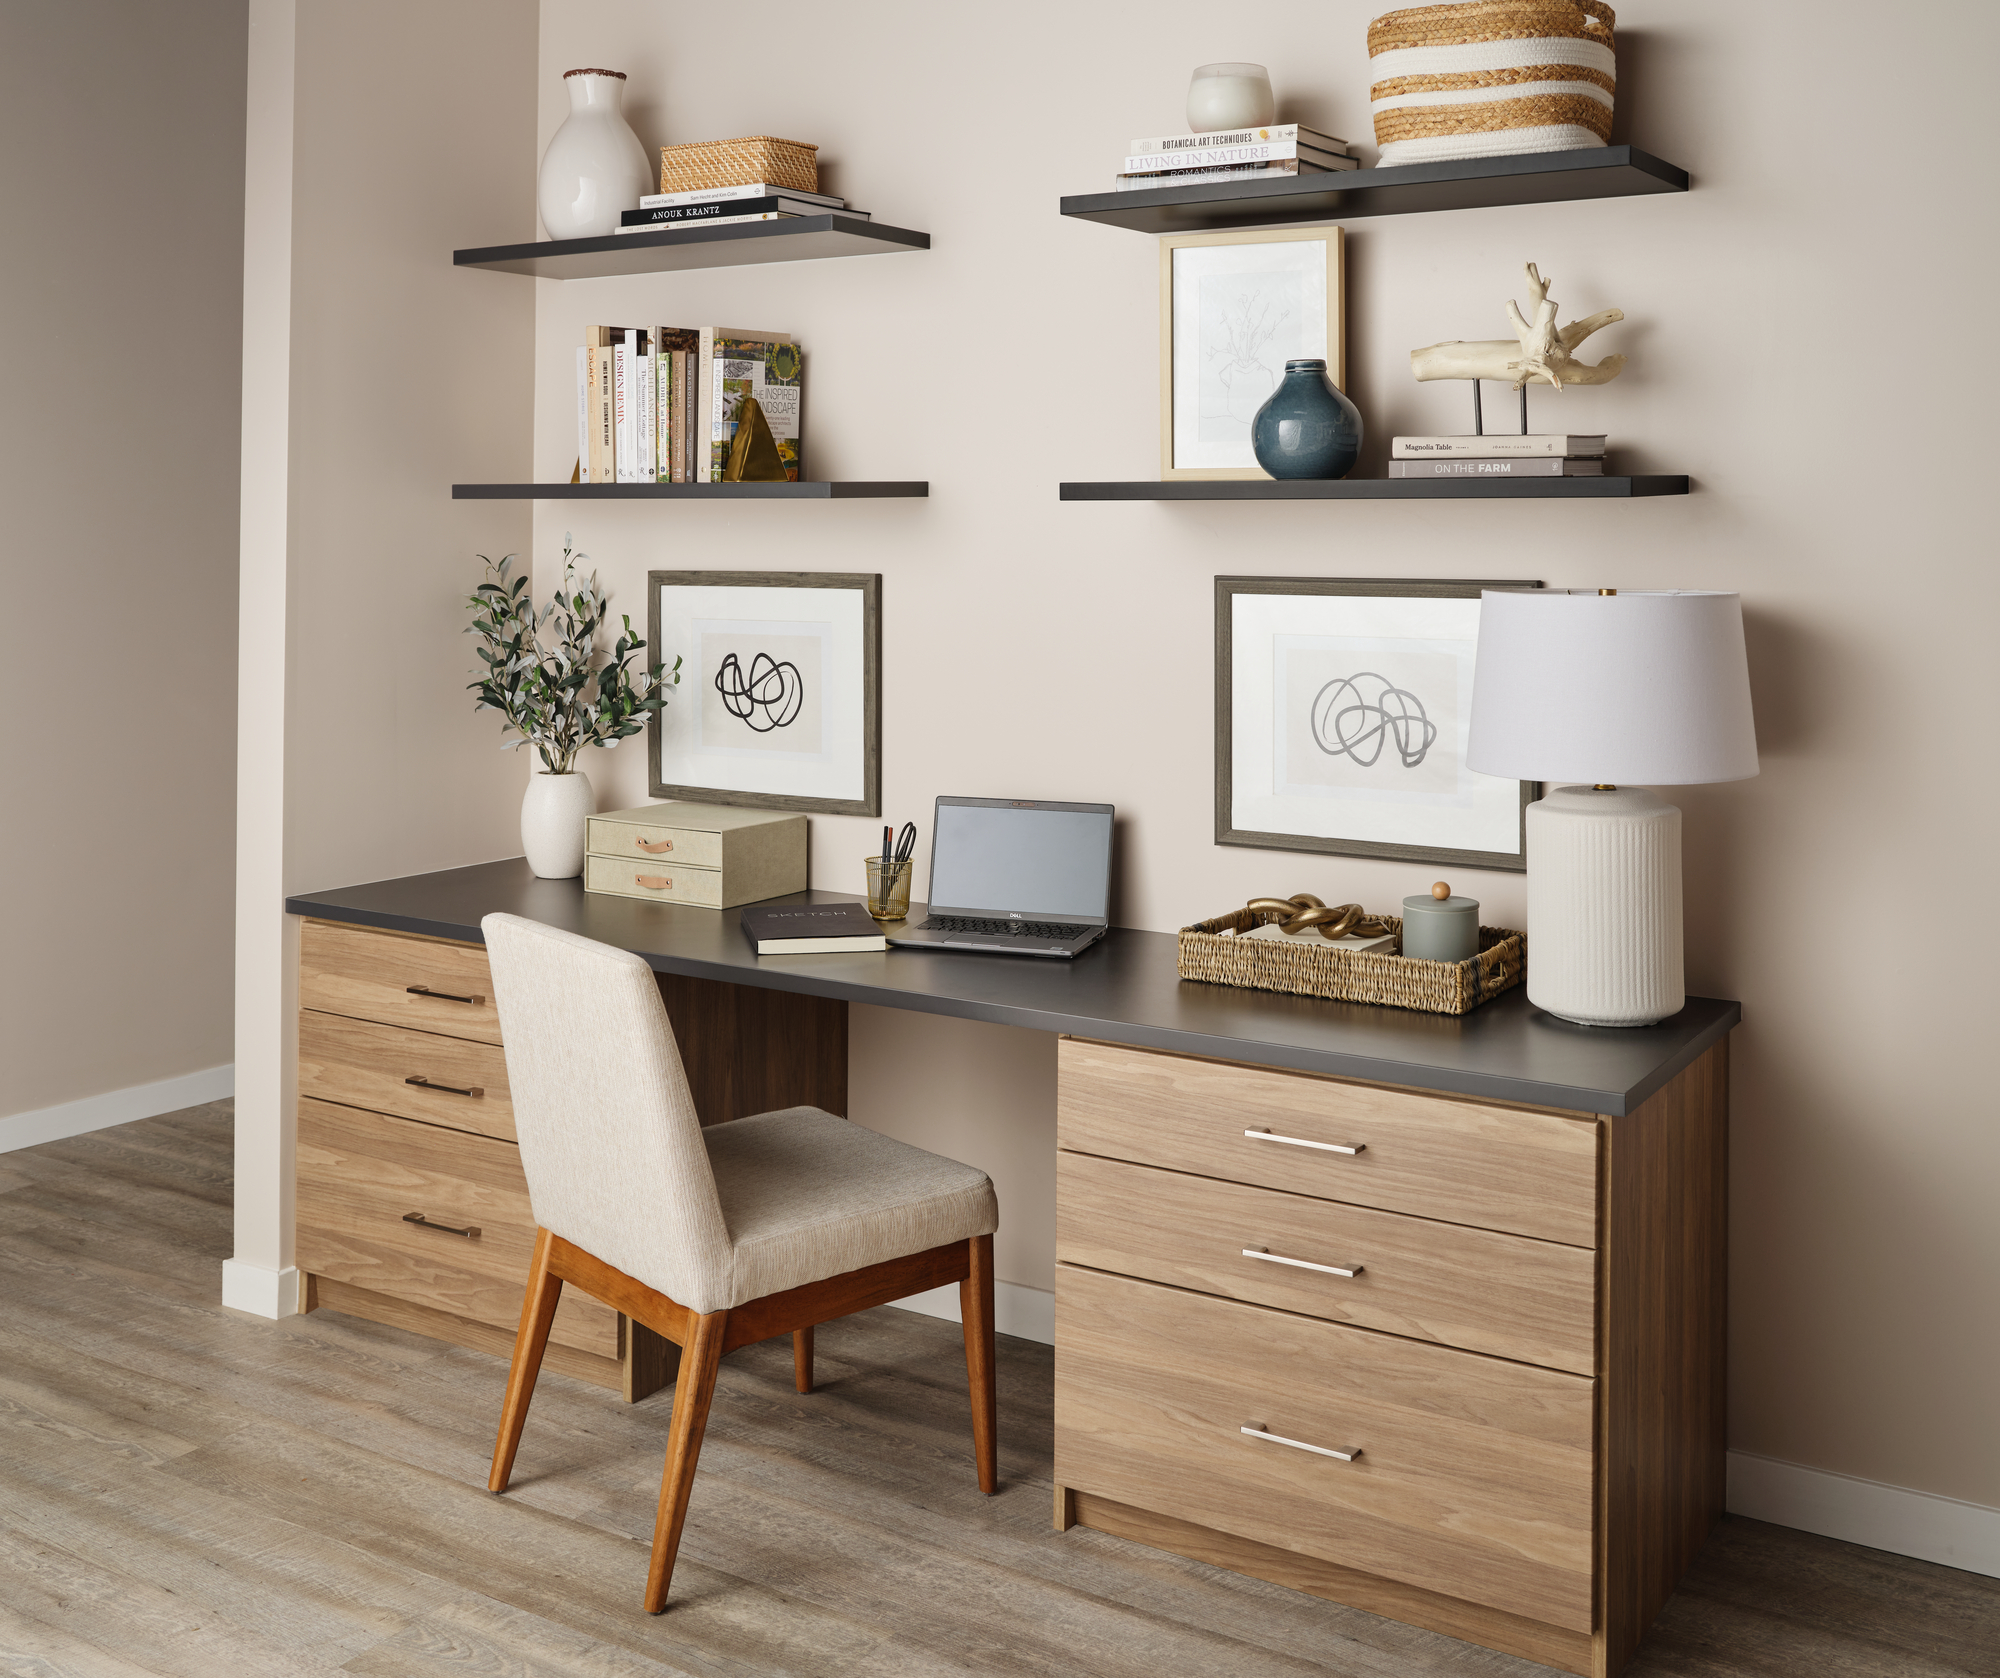 Home office in Charcoal and New Natural with floating shelves from Inspired Closets